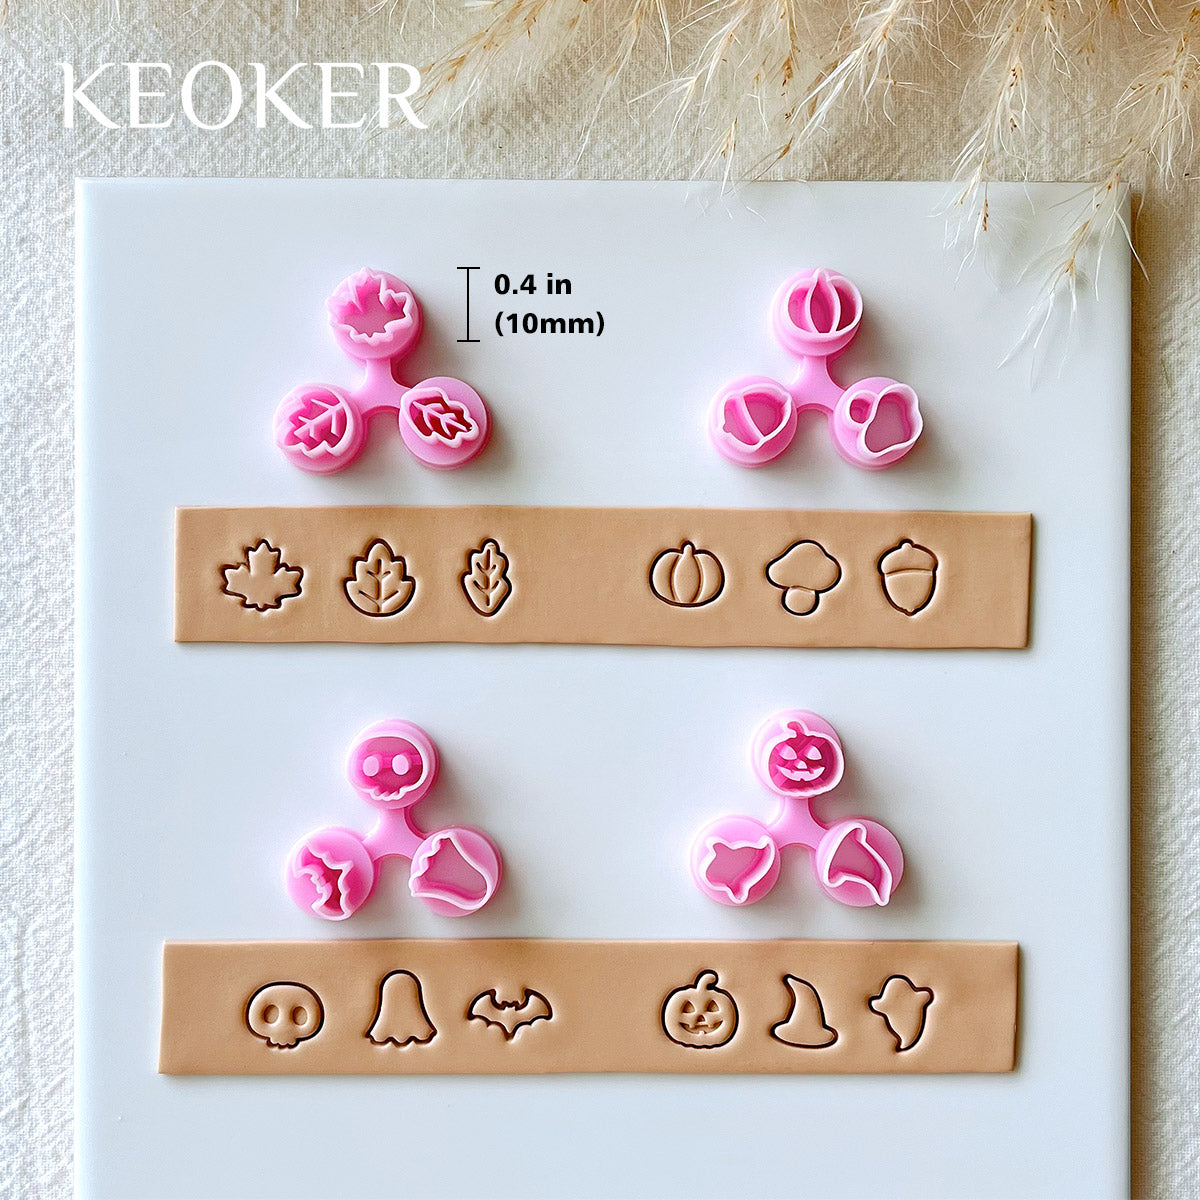  Keoker Polymer Clay Cutters for Fall - Acorn Clay Cutters for  Earrings Making, 10 Shapes Autumn Clay Earrings Cutters, Clay Cutters for  Polymer Clay Jewelry (Earrings Clay Cutters)